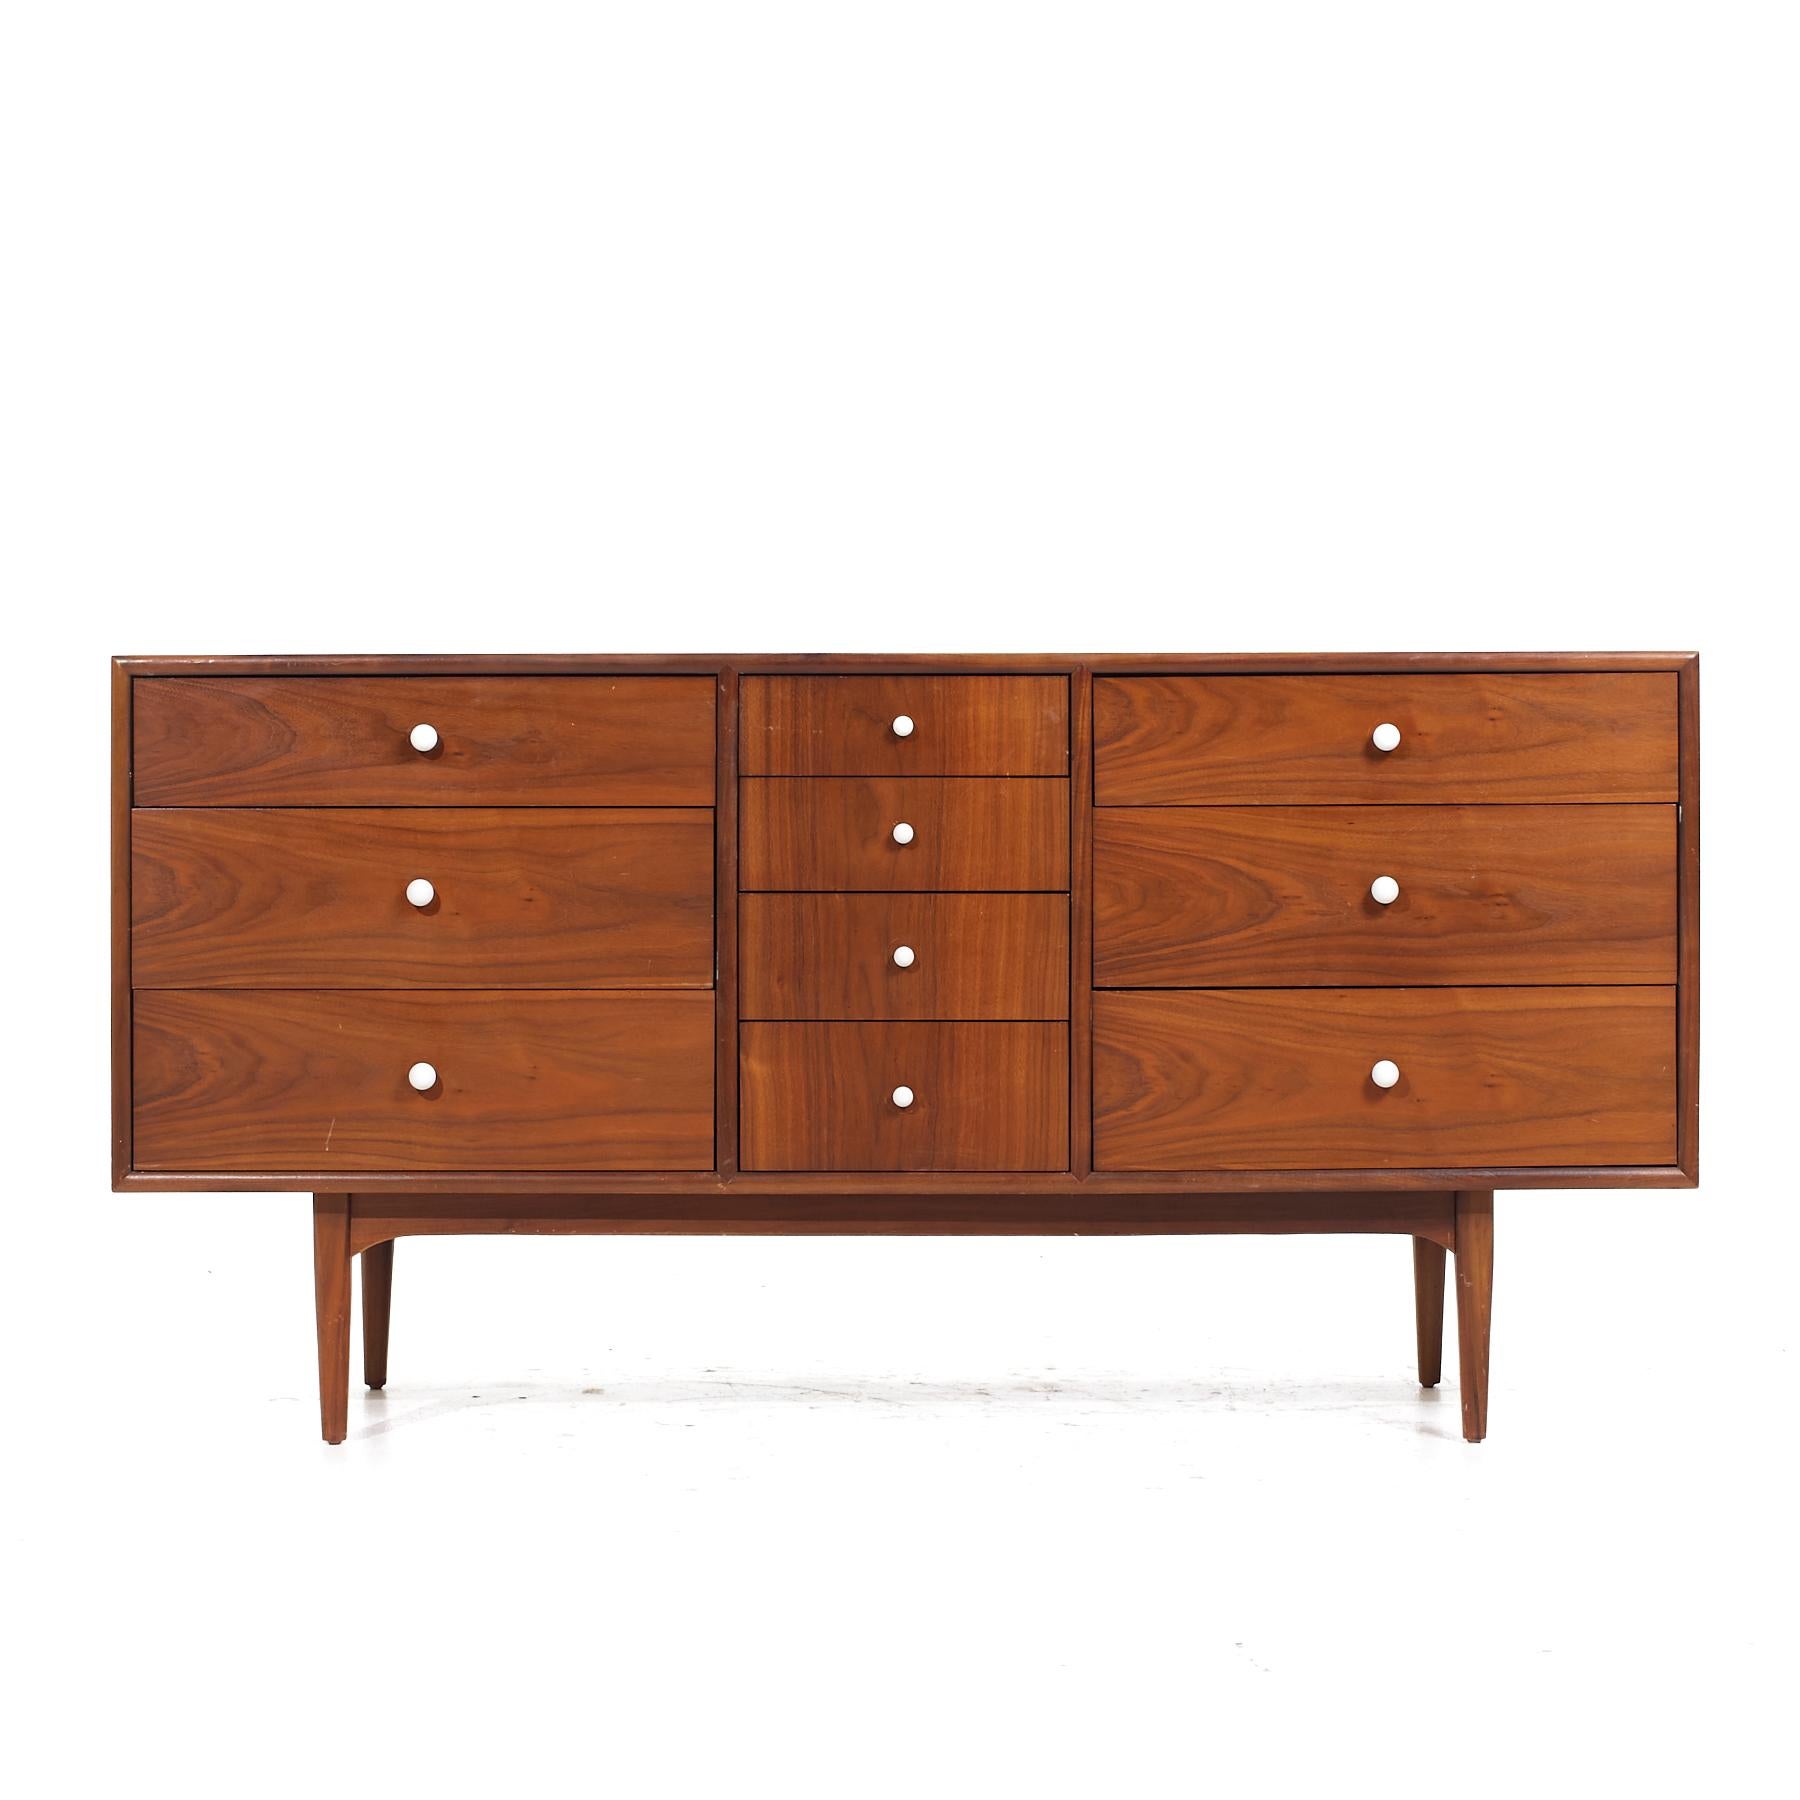 Kipp Stewart for Drexel Declaration Mid Century Walnut Lowboy Dresser

This lowboy measures: 62 wide x 20 deep x 31.25 inches high

All pieces of furniture can be had in what we call restored vintage condition. That means the piece is restored upon